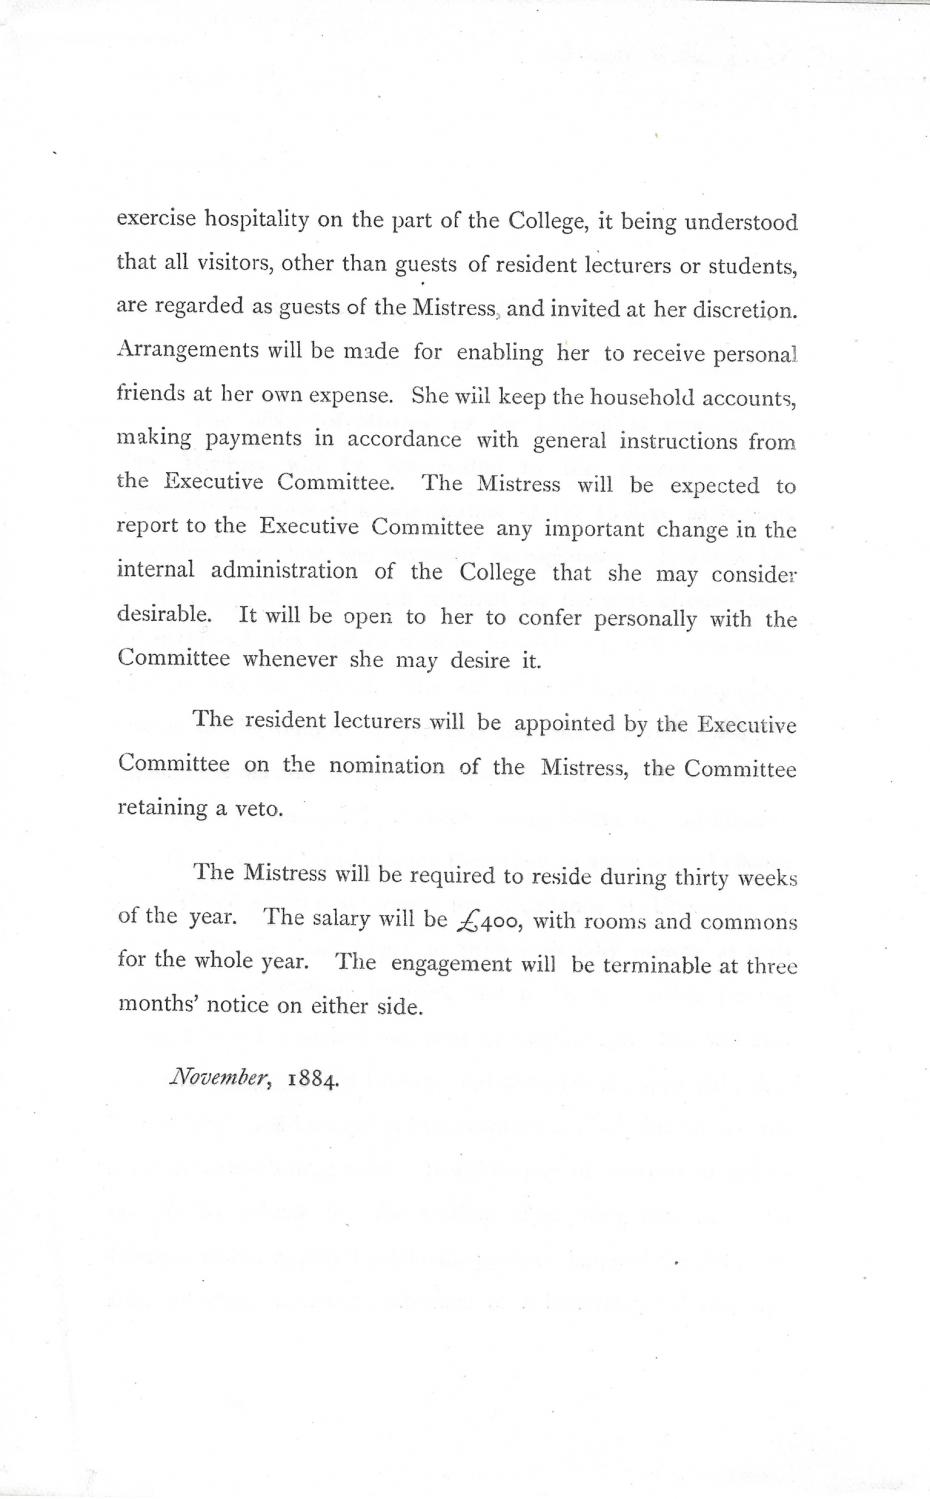 Statement of the duties and status of the office of Mistress, November 1884 (archive reference: GCGB 2/1/8pt).